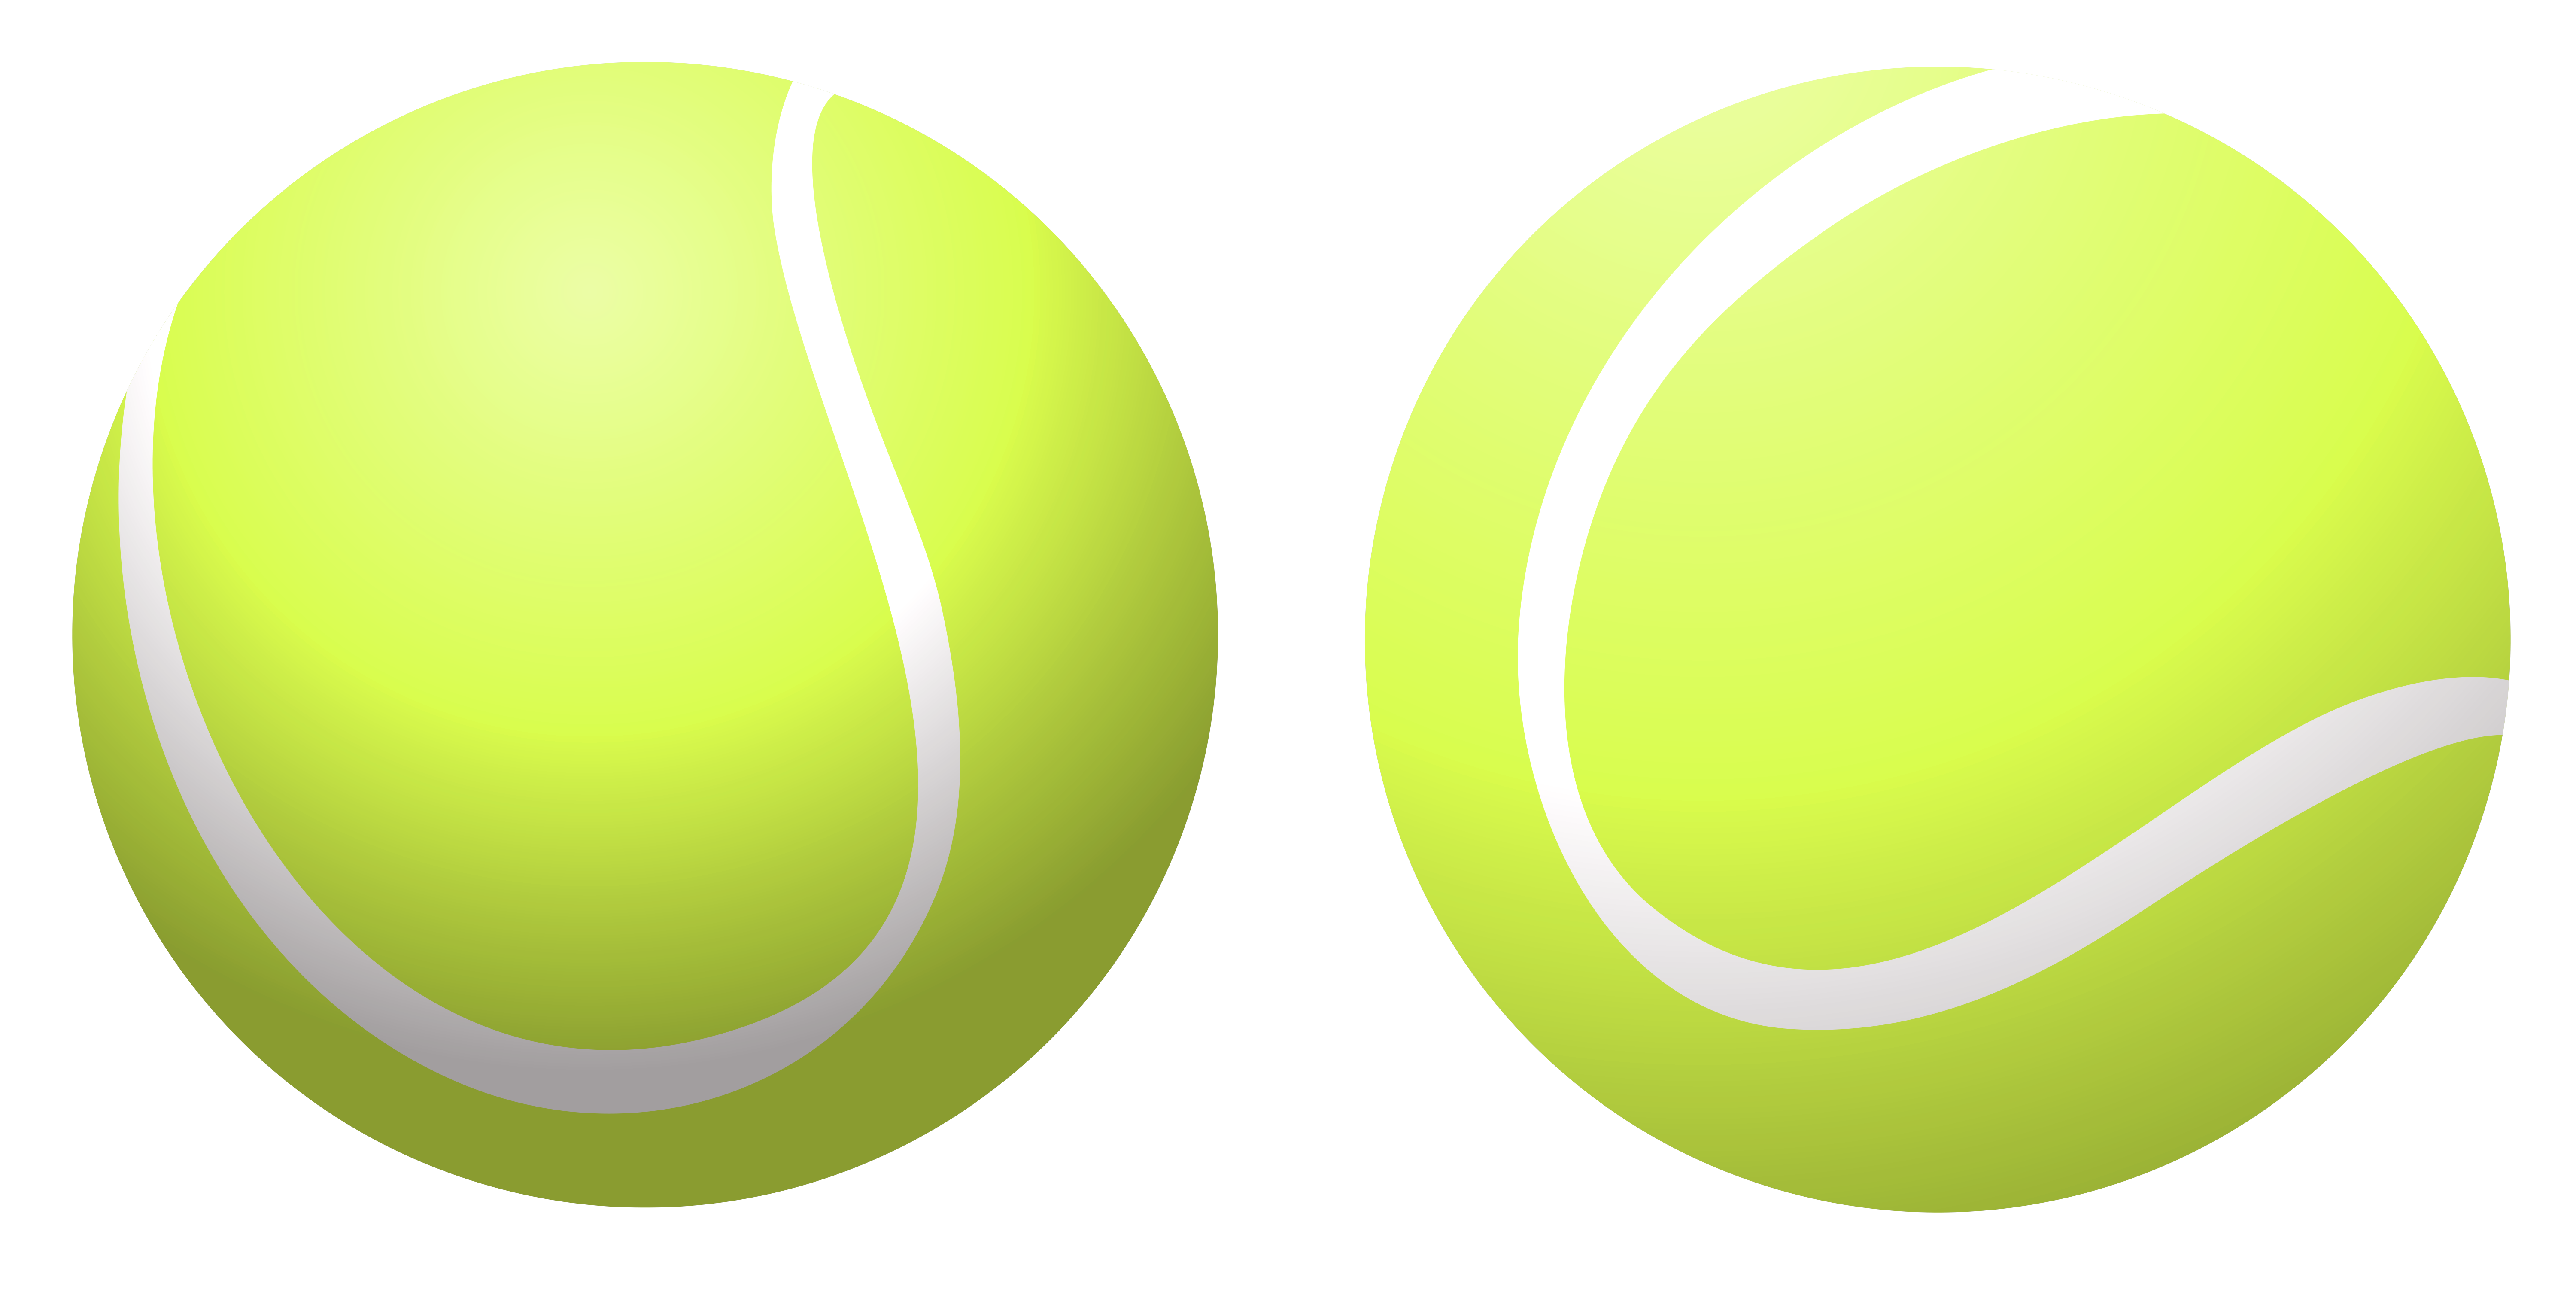 Free Tennis Ball Cliparts, Download Free Clip Art, Free Clip.